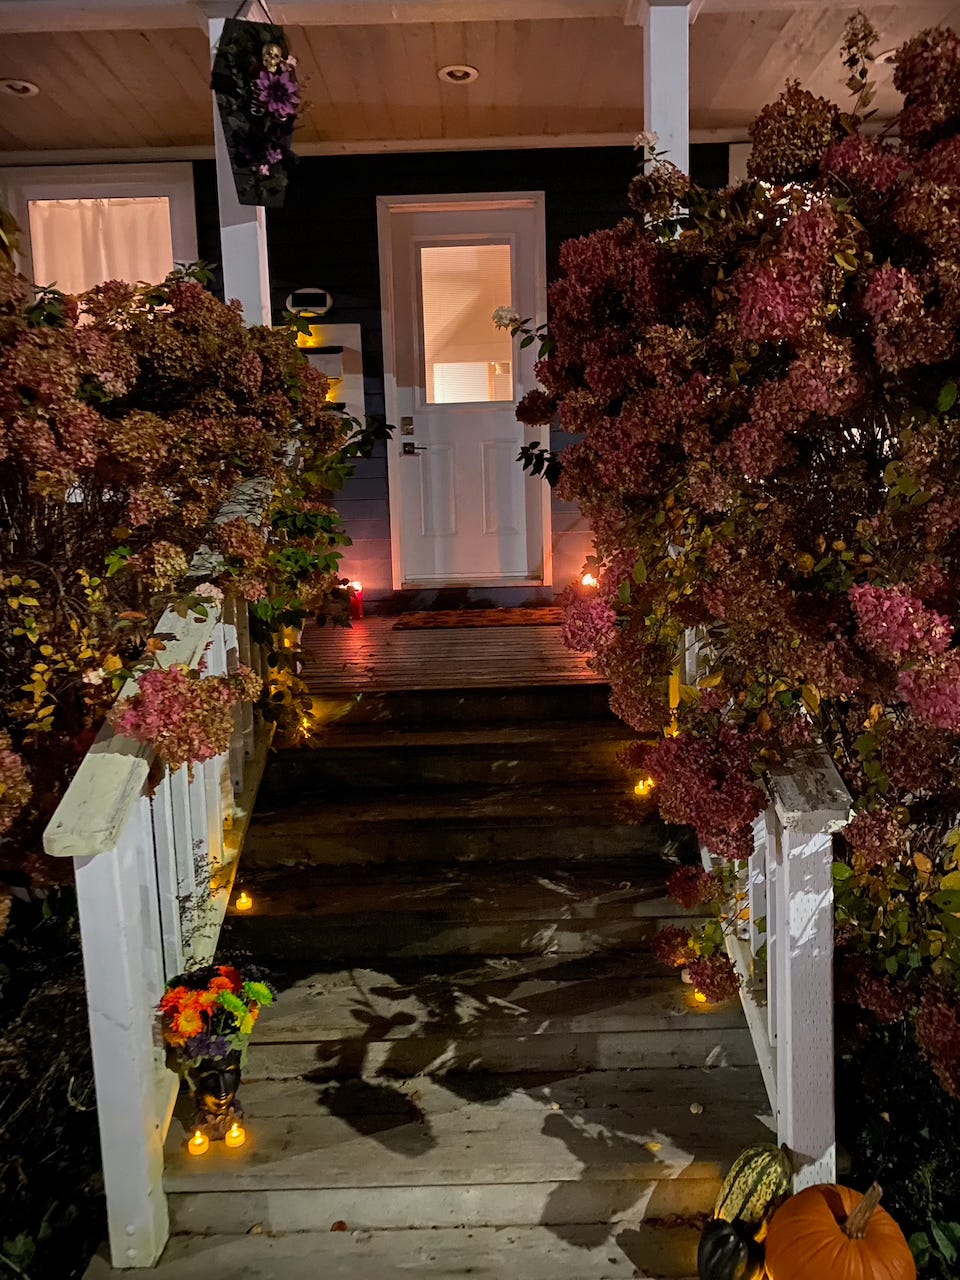 Wooden front steps lead up to the door of a house. Two giant hydrangea bushes spill their dying flowers over the white wooden railings. Pumpkins and autumn mums decorate the bottom steps, and there are candles leading up them to the door.